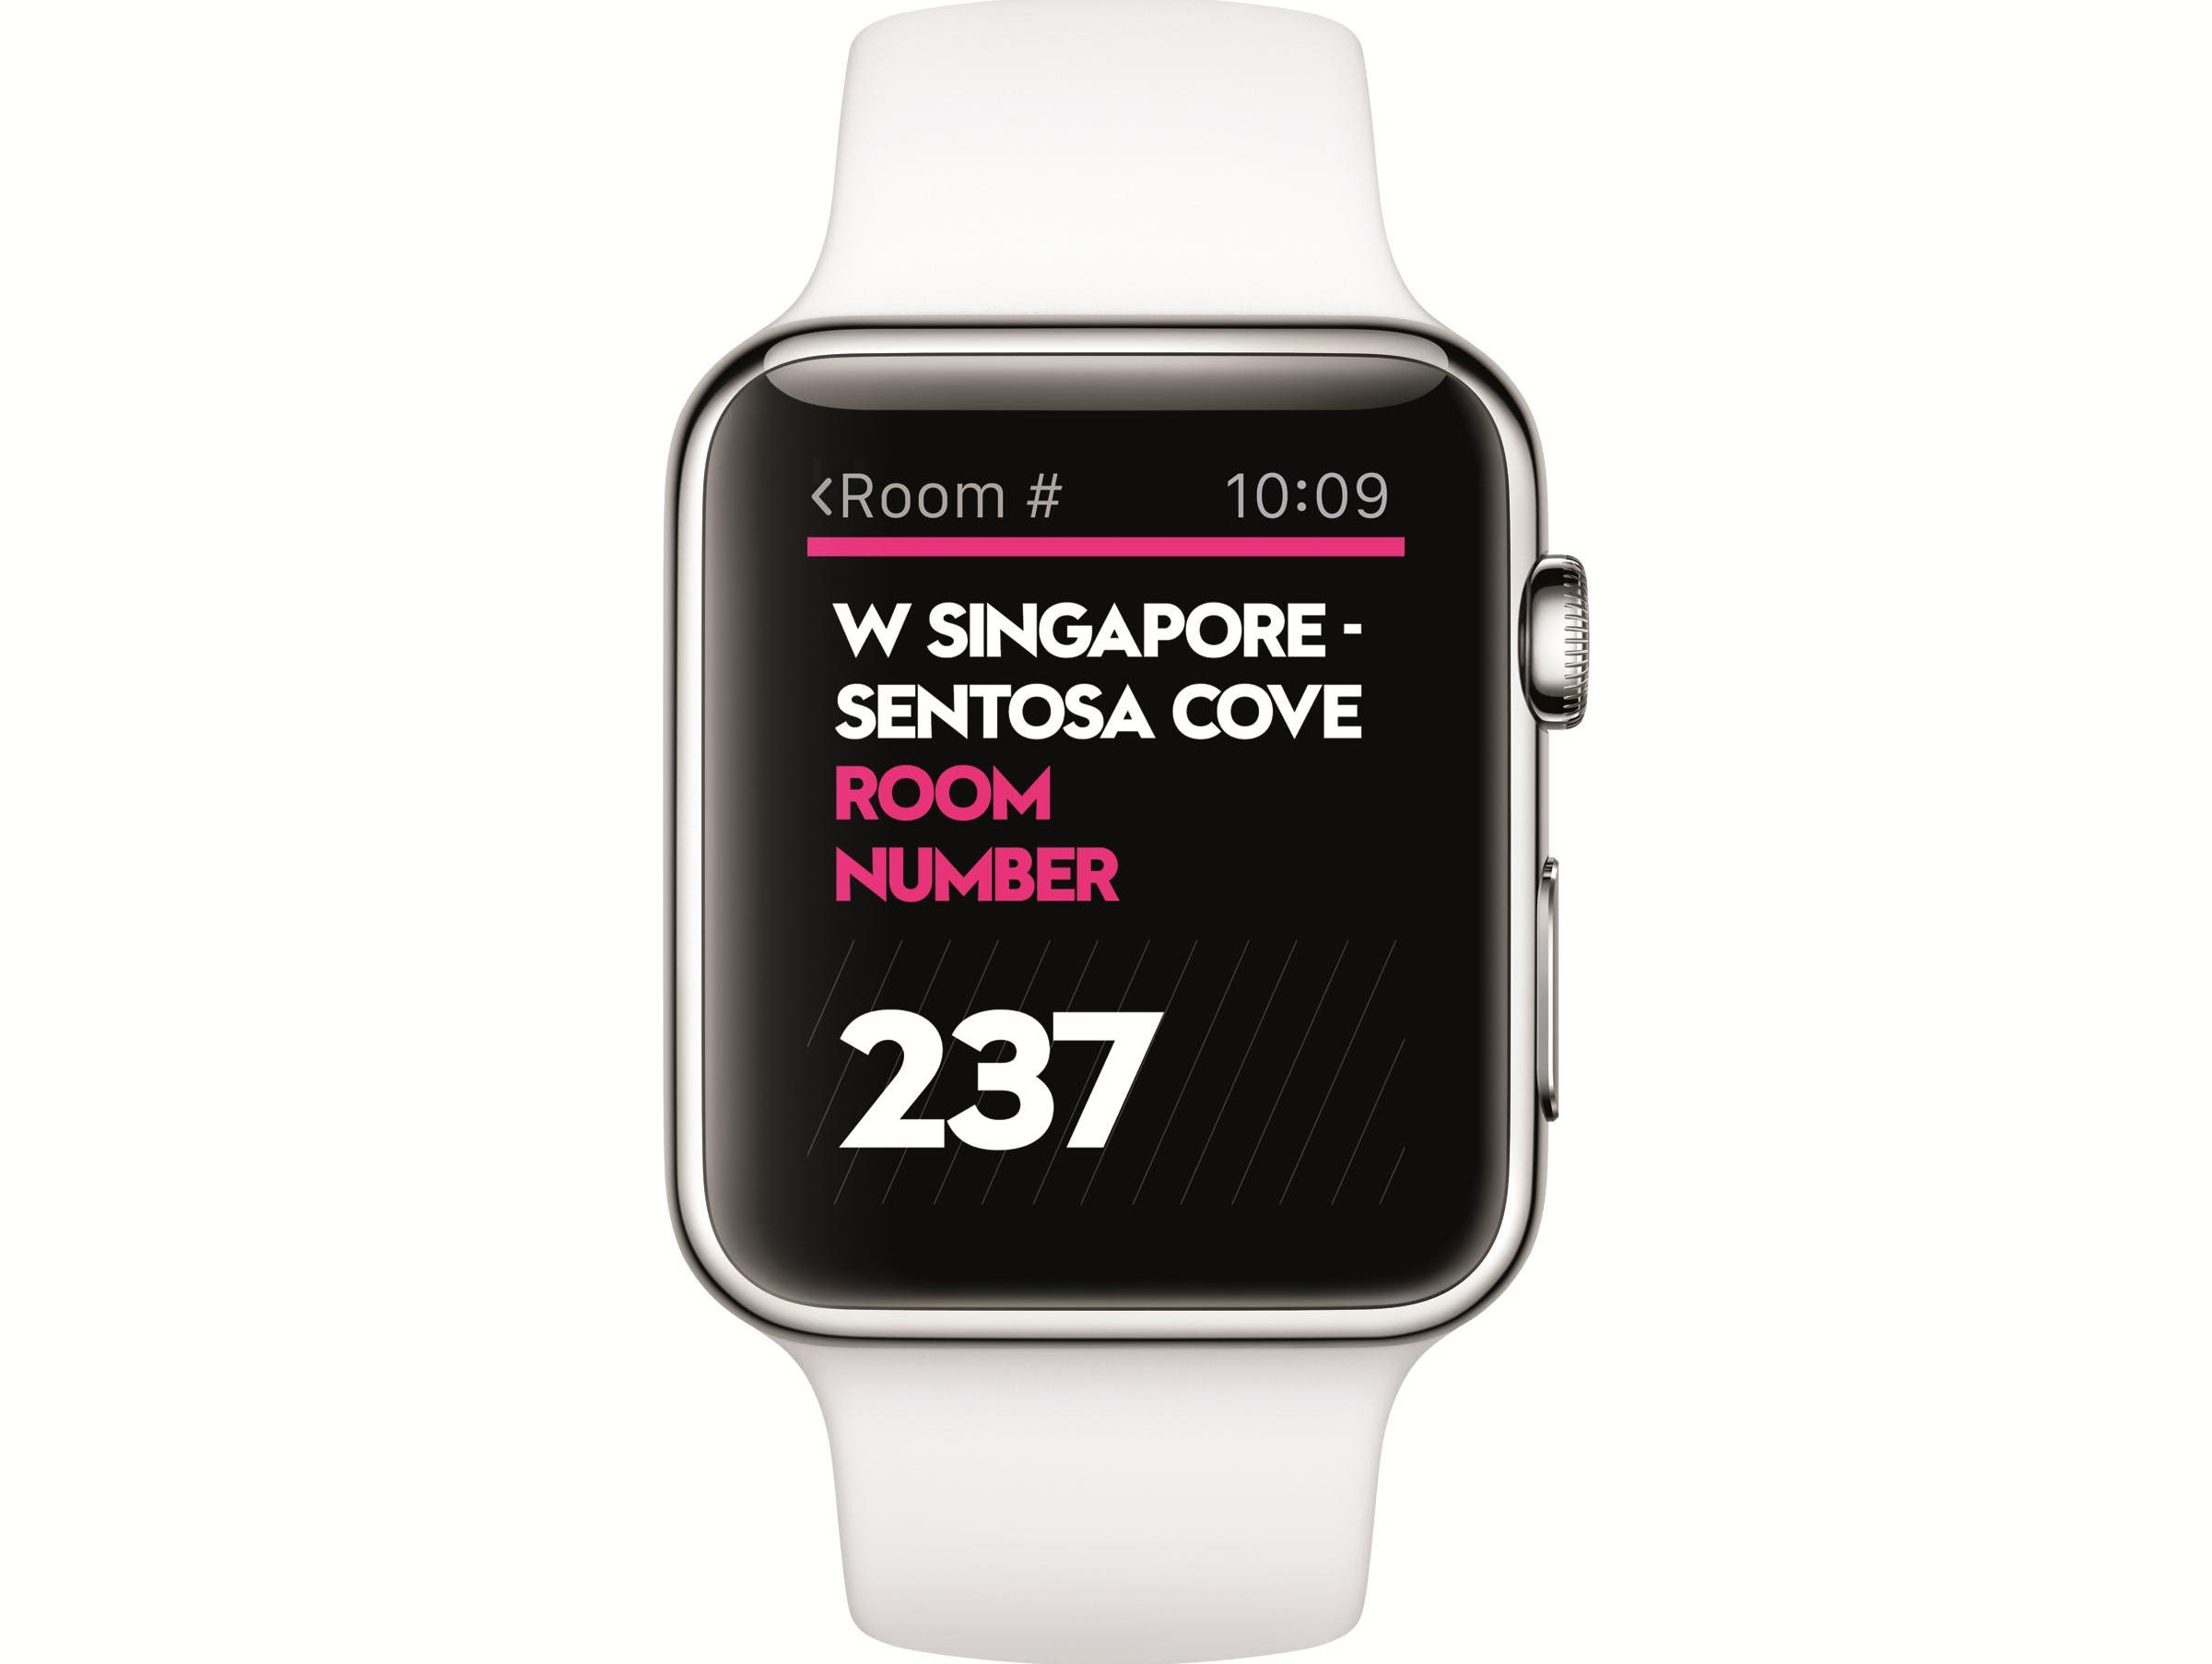 Starwood Hotels and Resorts will launch an app for the Apple Watch.